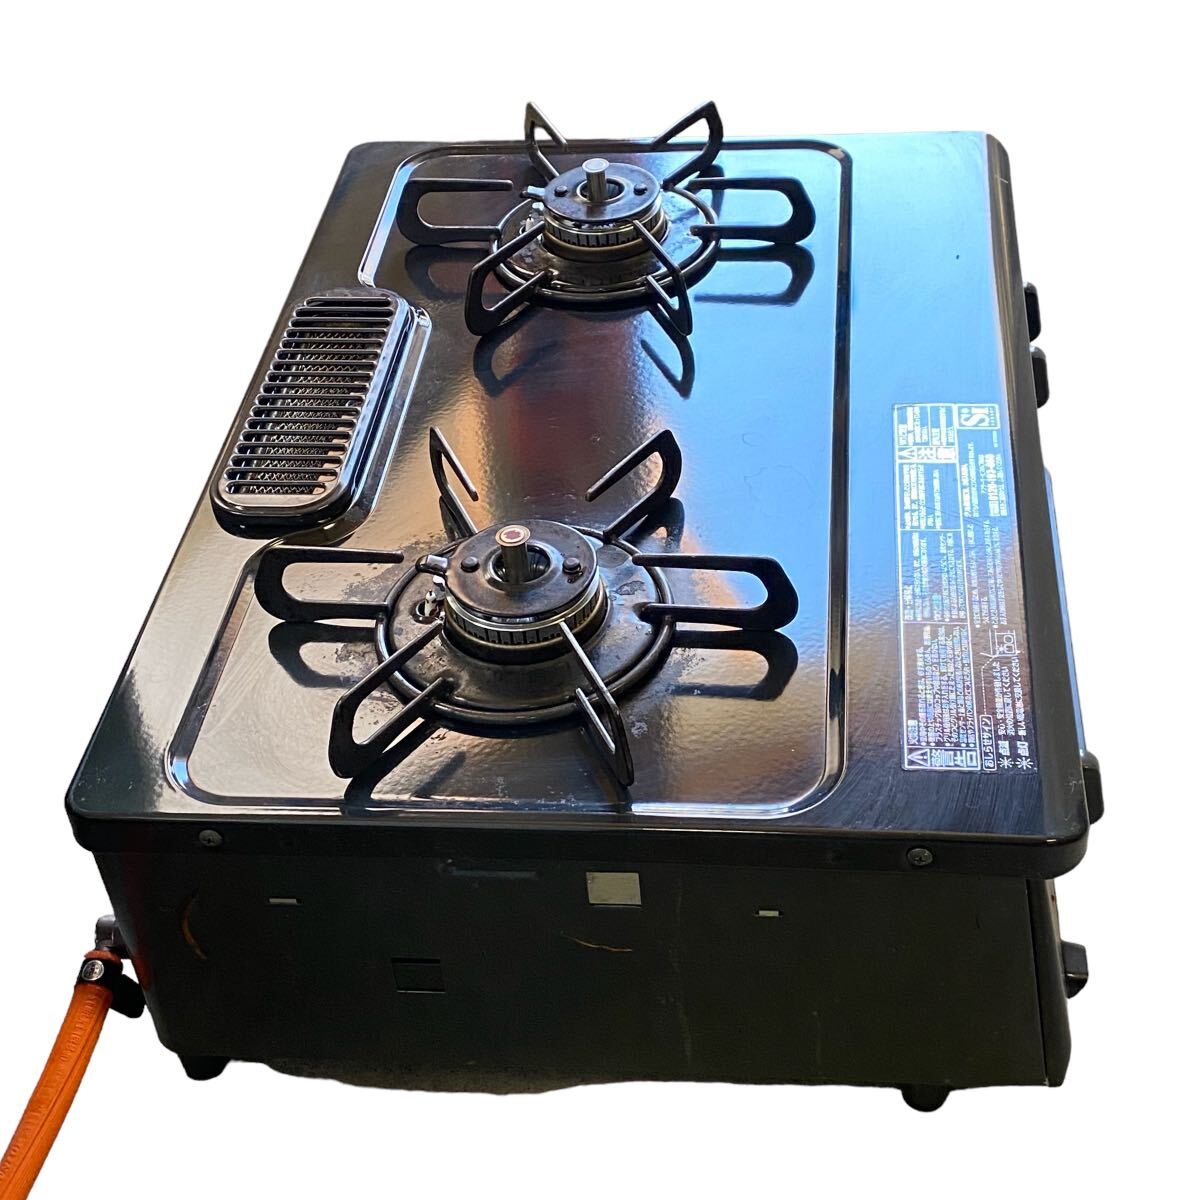 A! Paloma LP gas gas portable cooking stove IC-S37-L left a little over fire propane LP gas paroma gas-stove water less grill switch type empty .. prevention 